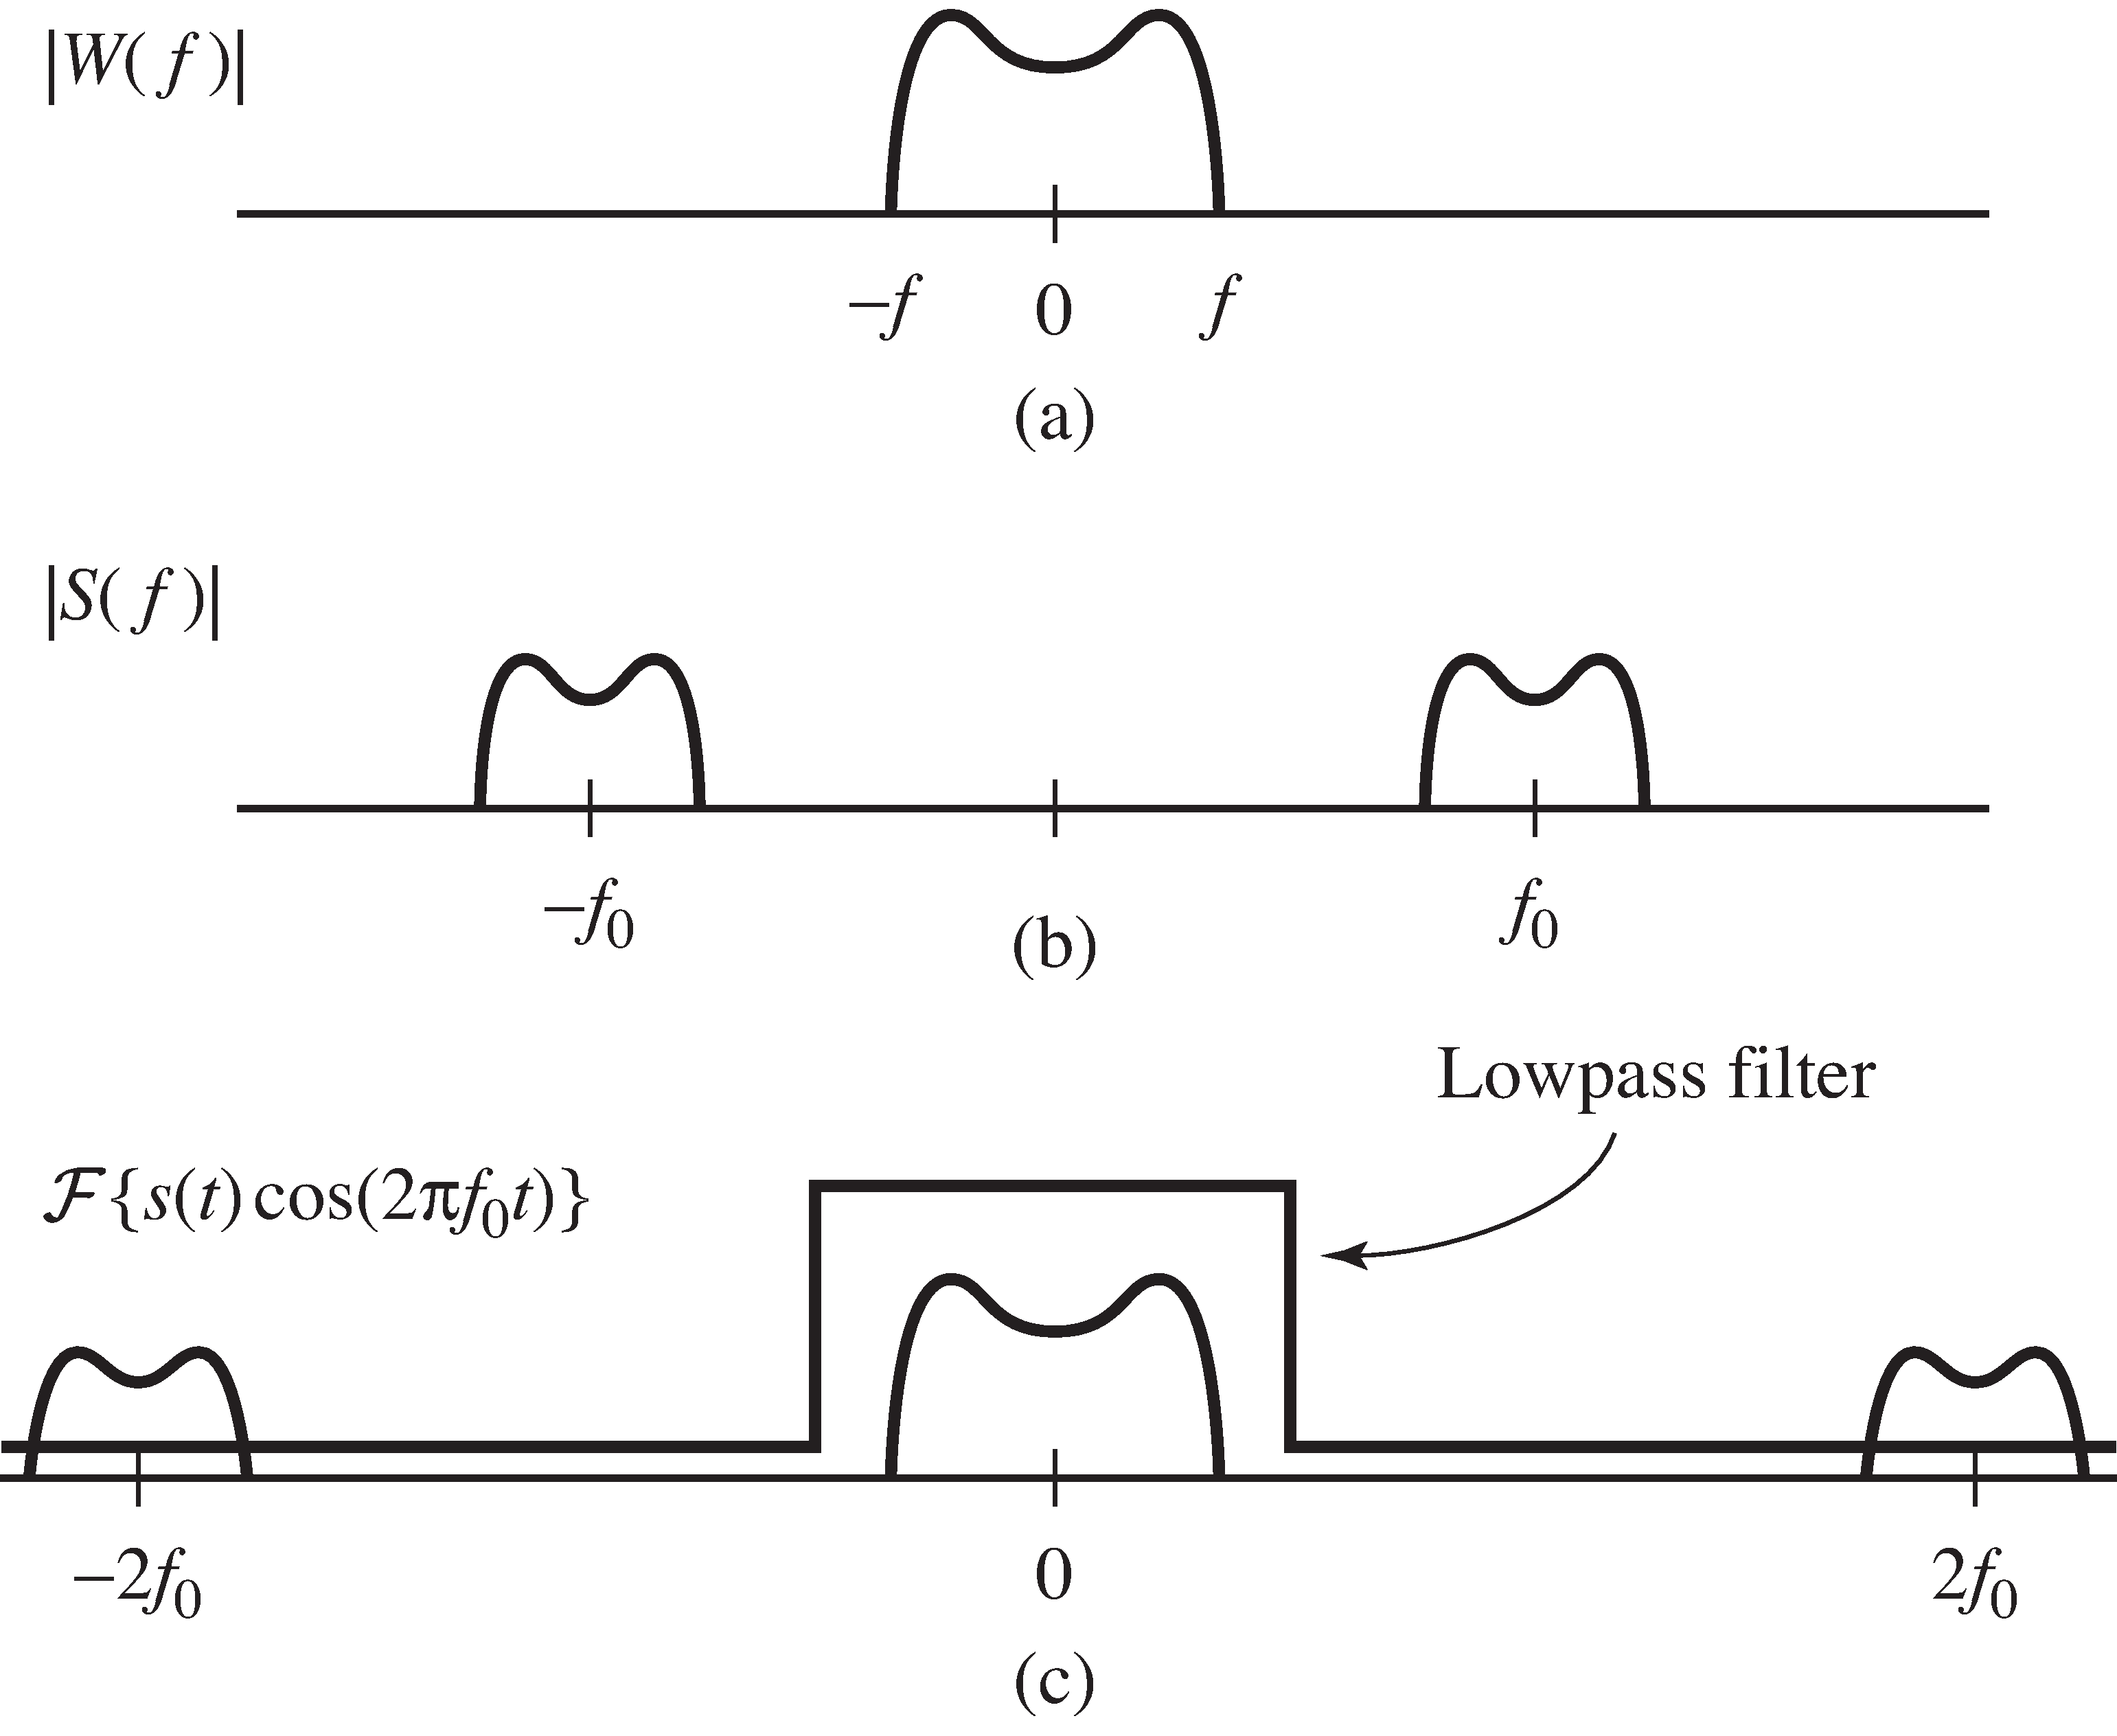 The message can be recovered by downconversion and lowpass filtering. (a) Shows the original spectrum of the message; (b) shows the message modulated by the carrier f_0; (c) shows the demodulated signal. Filtering with an LPF recovers the original spectrum.